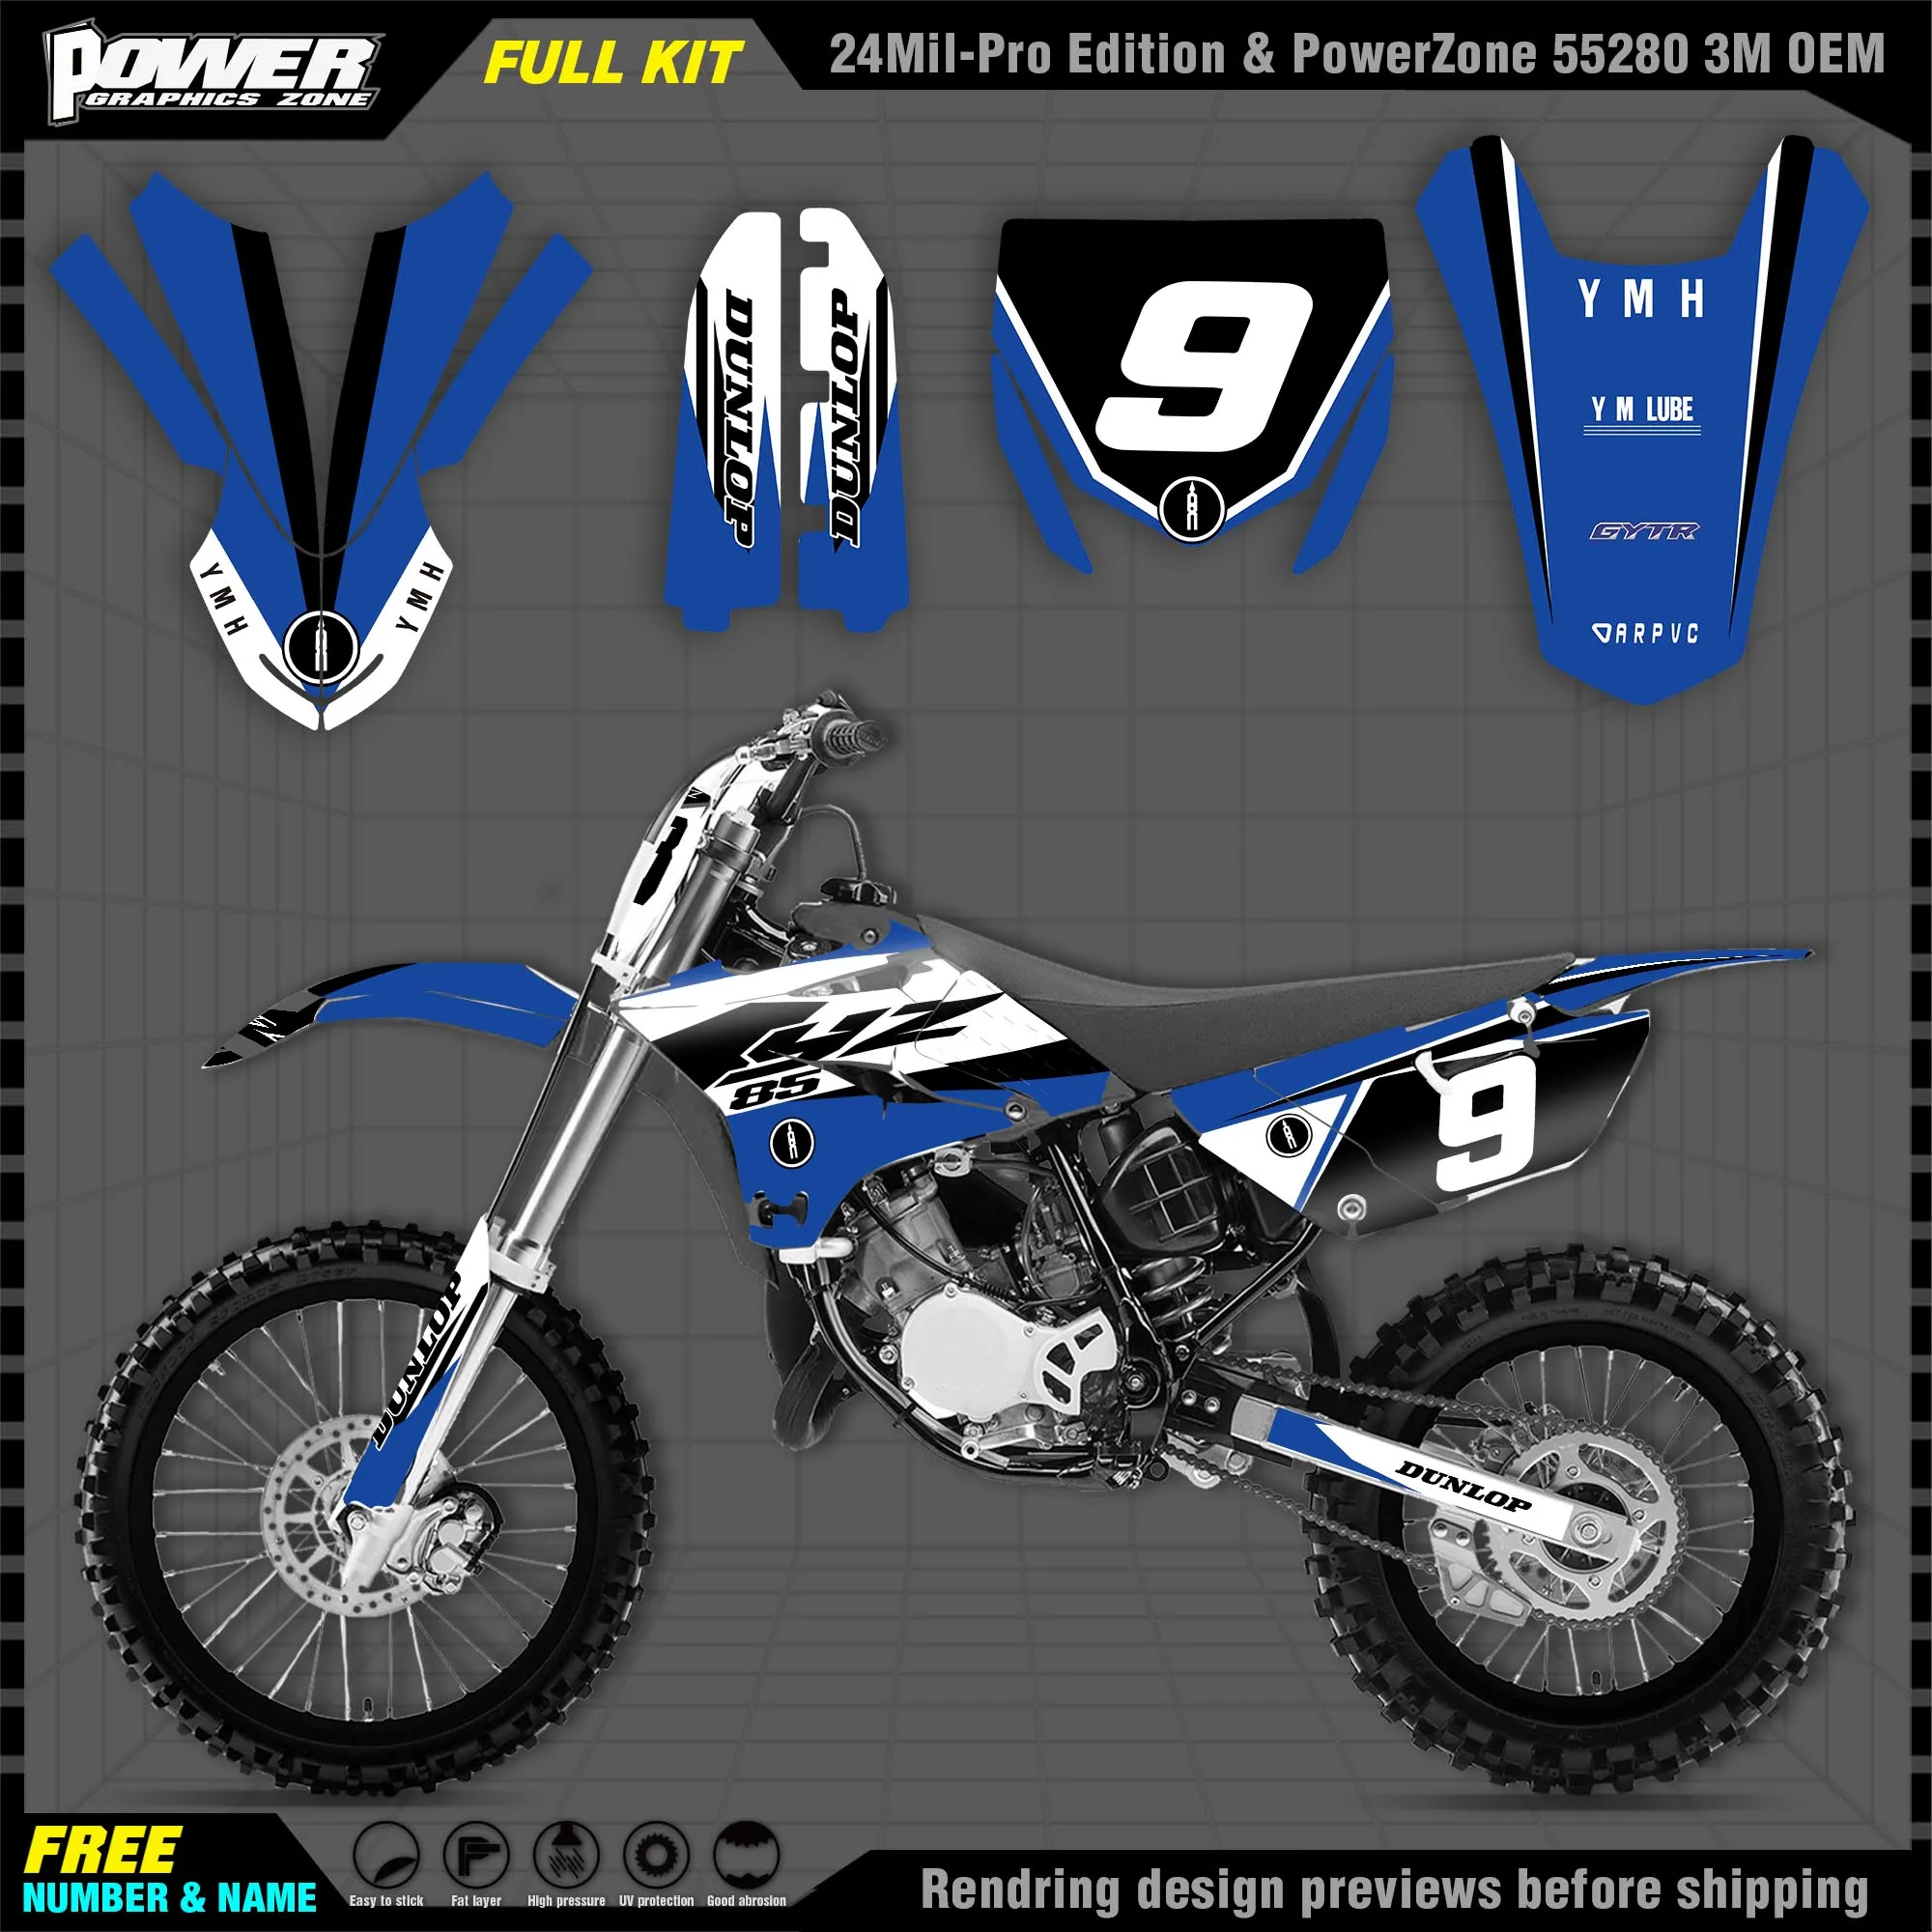 

PowerZone Custom Team Graphics Backgrounds Decals 3M Stickers Kit For YAMAHA 2015 2016 2017 2018 2019 YZ85 005